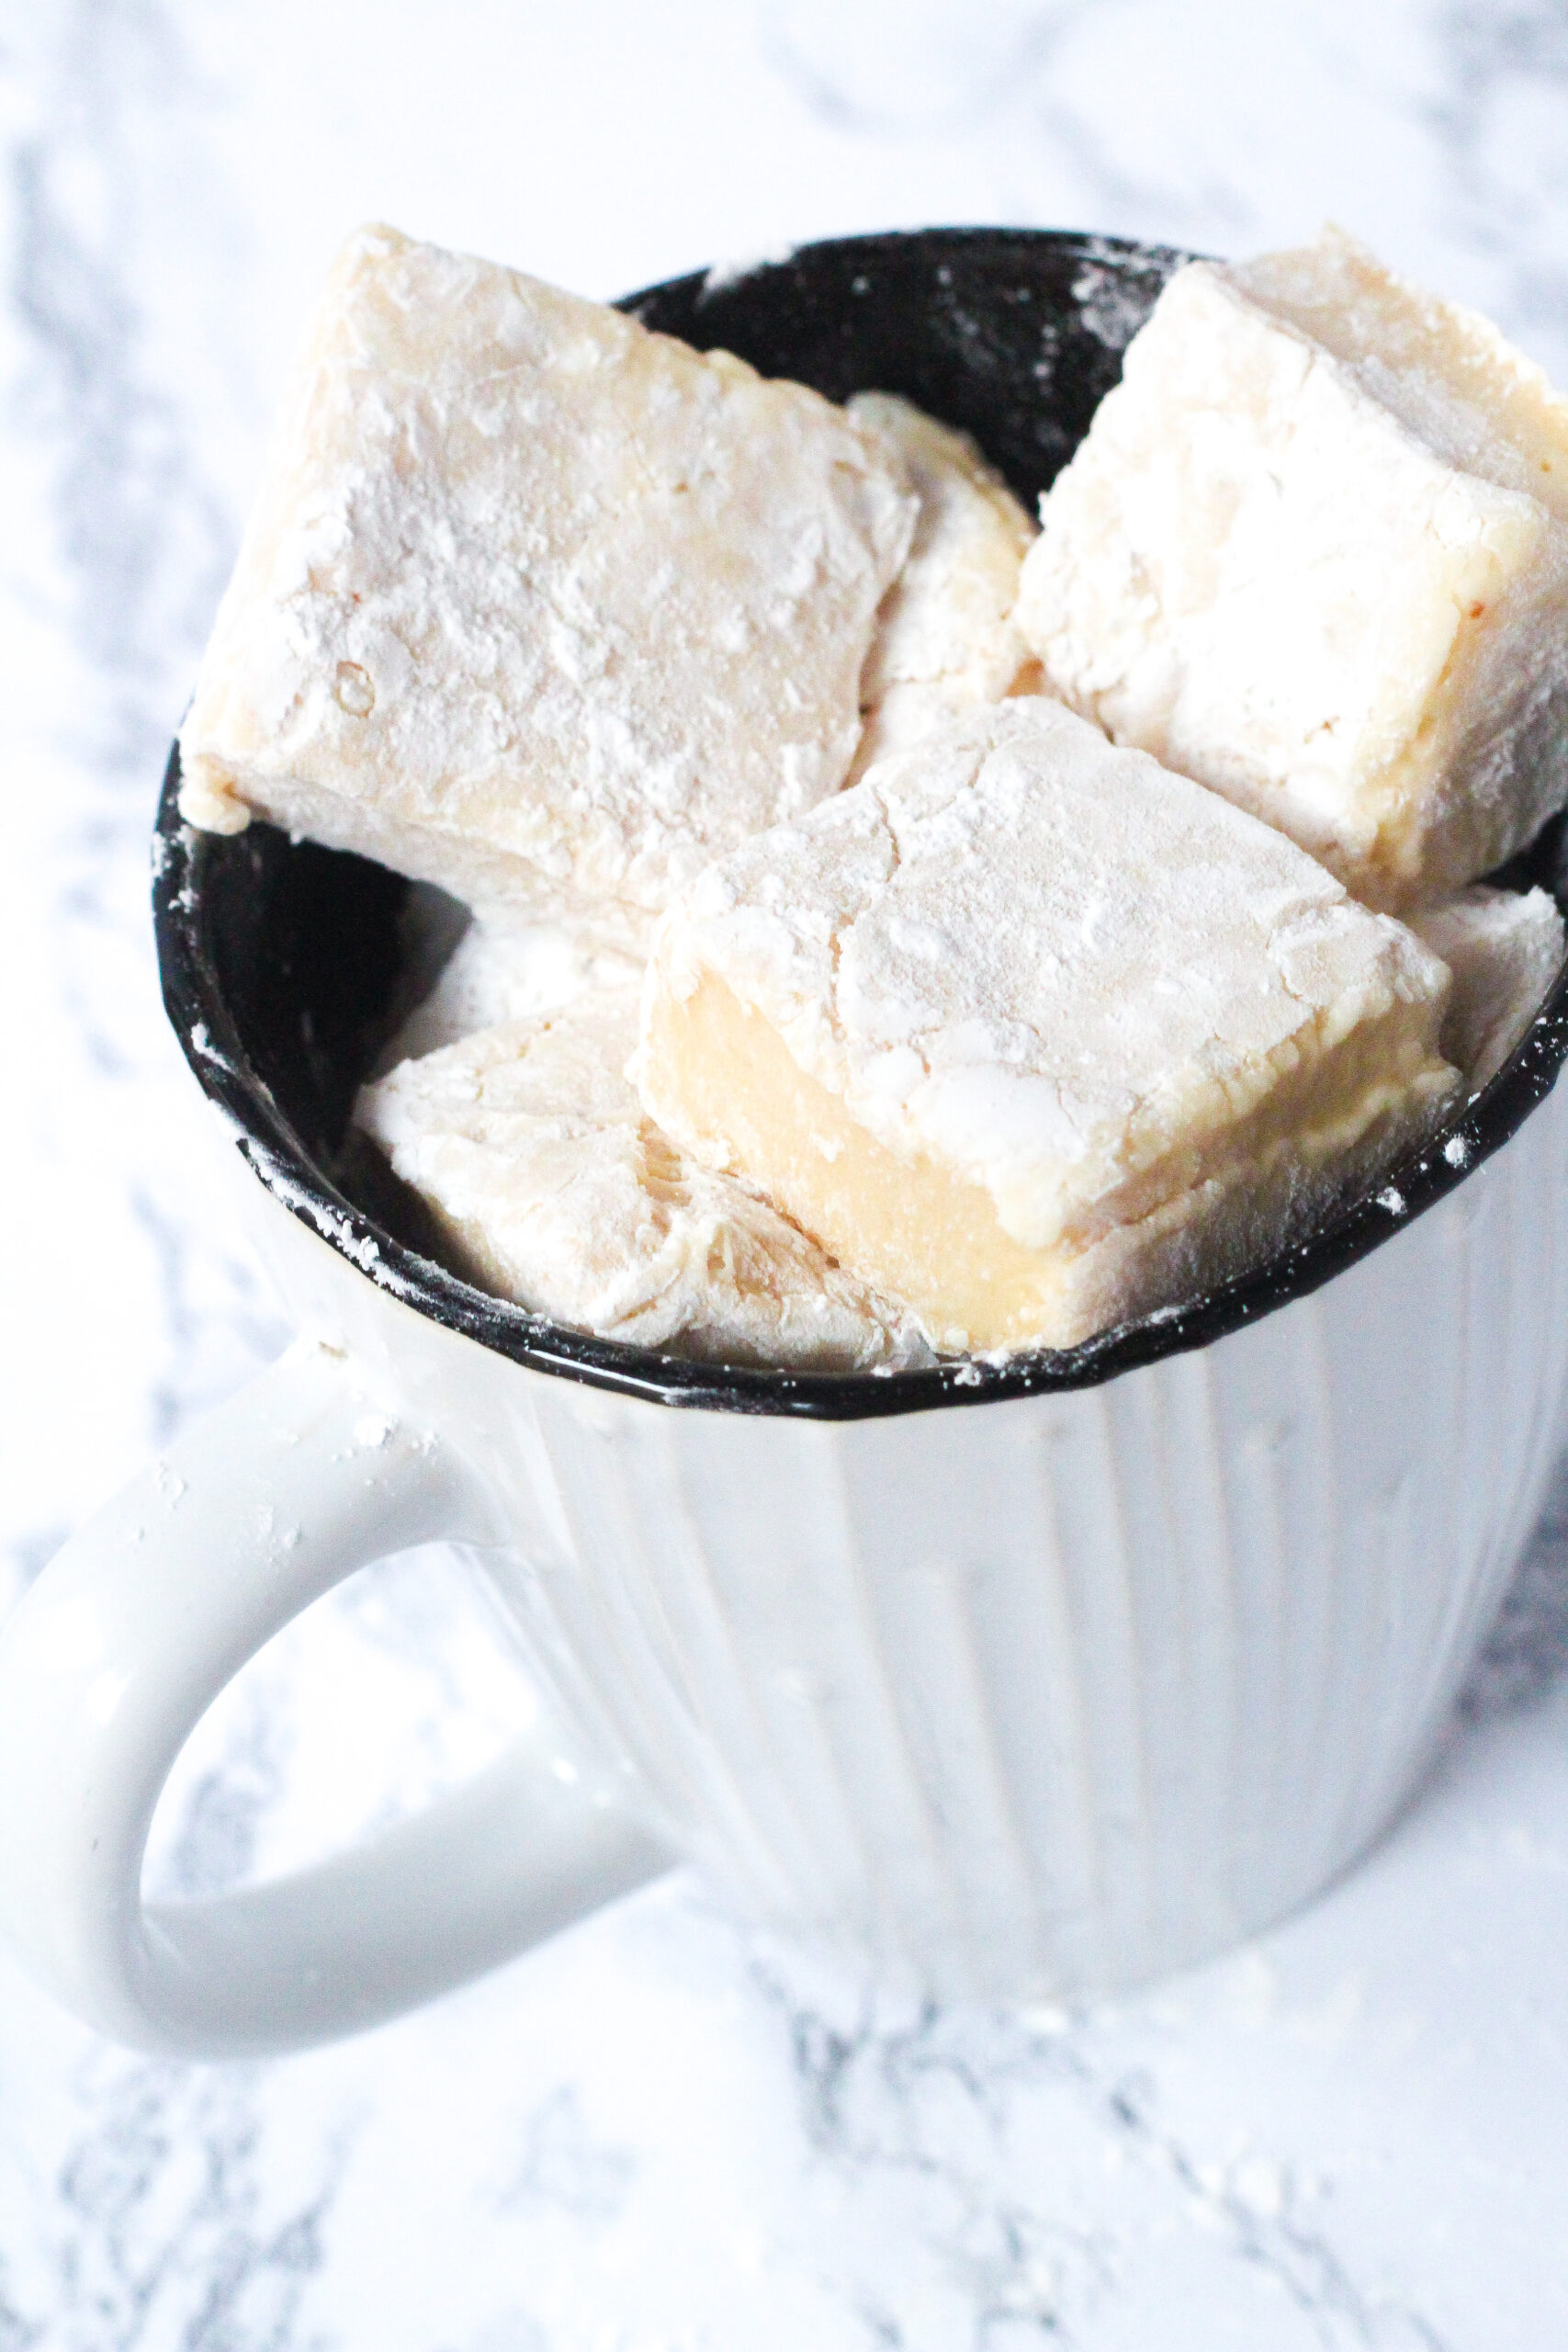 An angled top-down view of a mage that is white and textured on the outside and black on the inside, filled with Bailey's Marshmallows. The mug sits on a white marbled surface.